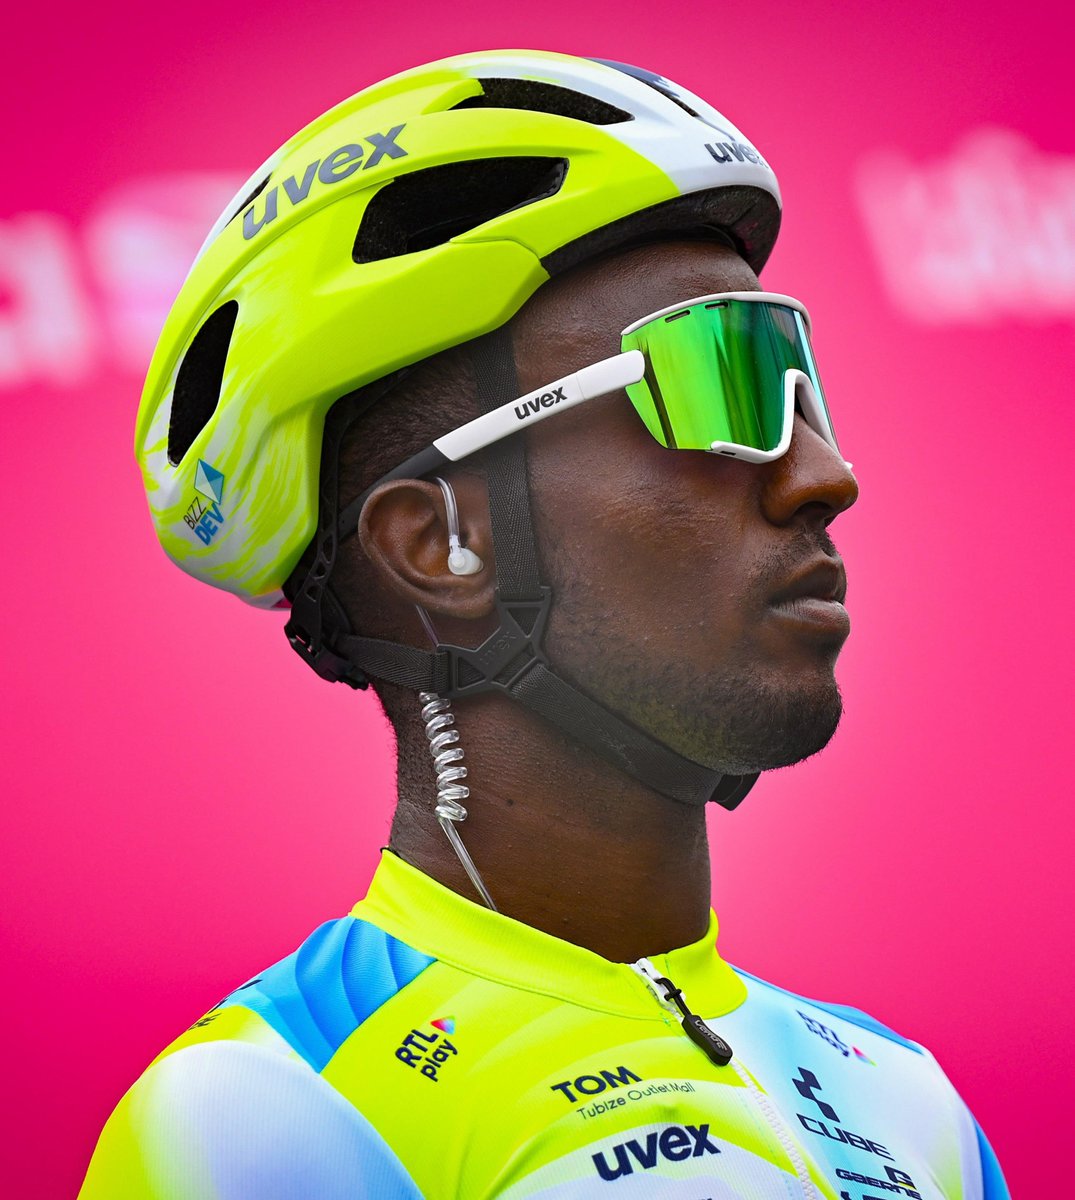 Worst feeling to see Bini leave the #GirodItalia 

We are with you all the way, you will be back champion 🇪🇷❤️

 ቢኒ ተመሊስካ ሻምፕዮን ክትከውን ኢኻ። ፎርሳ ቢኒ